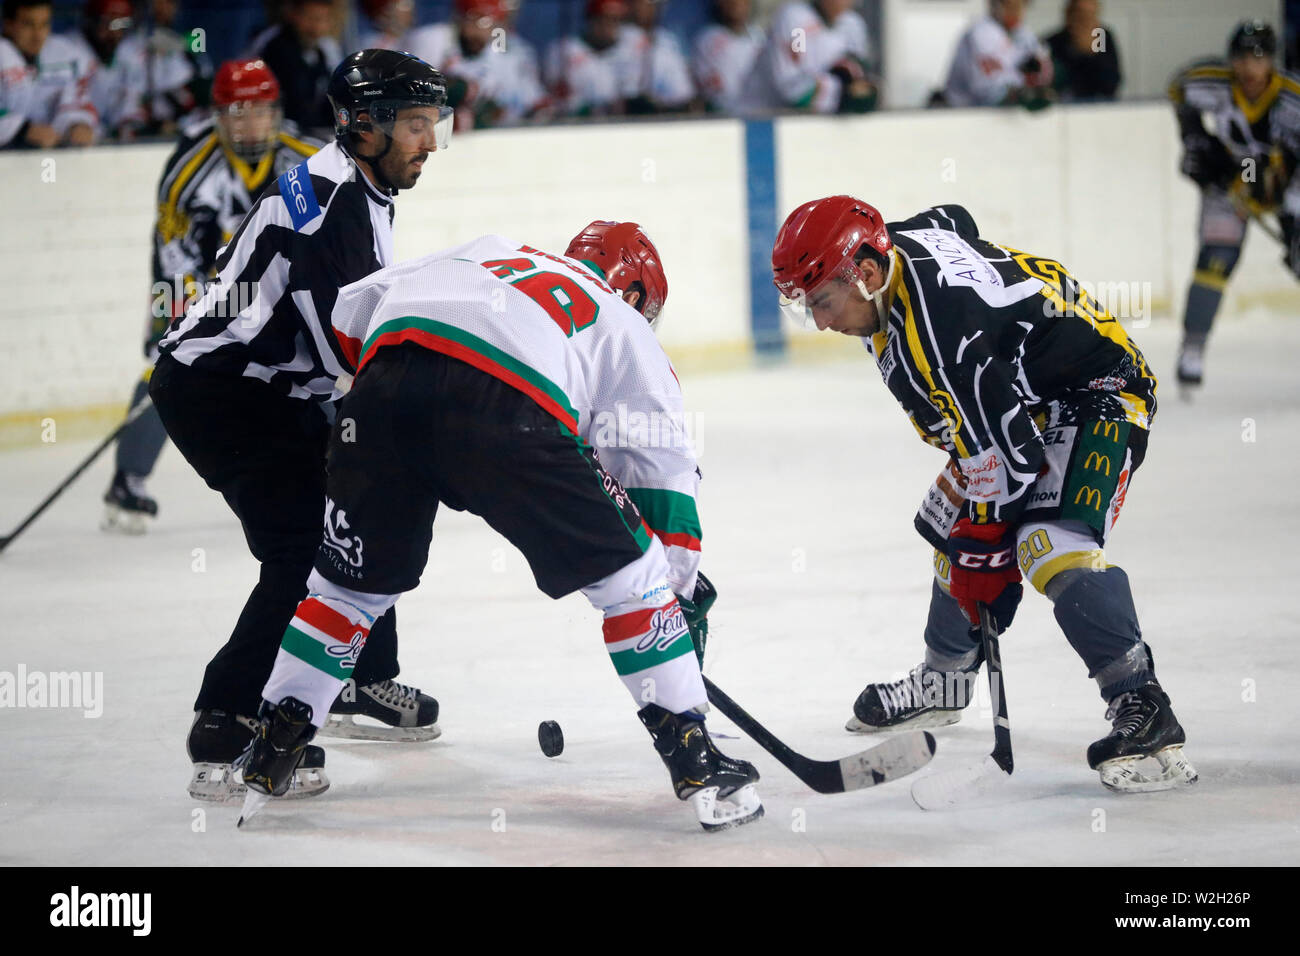 Ice Hockey match. Face off. Players in action. HC Mont-Blanc